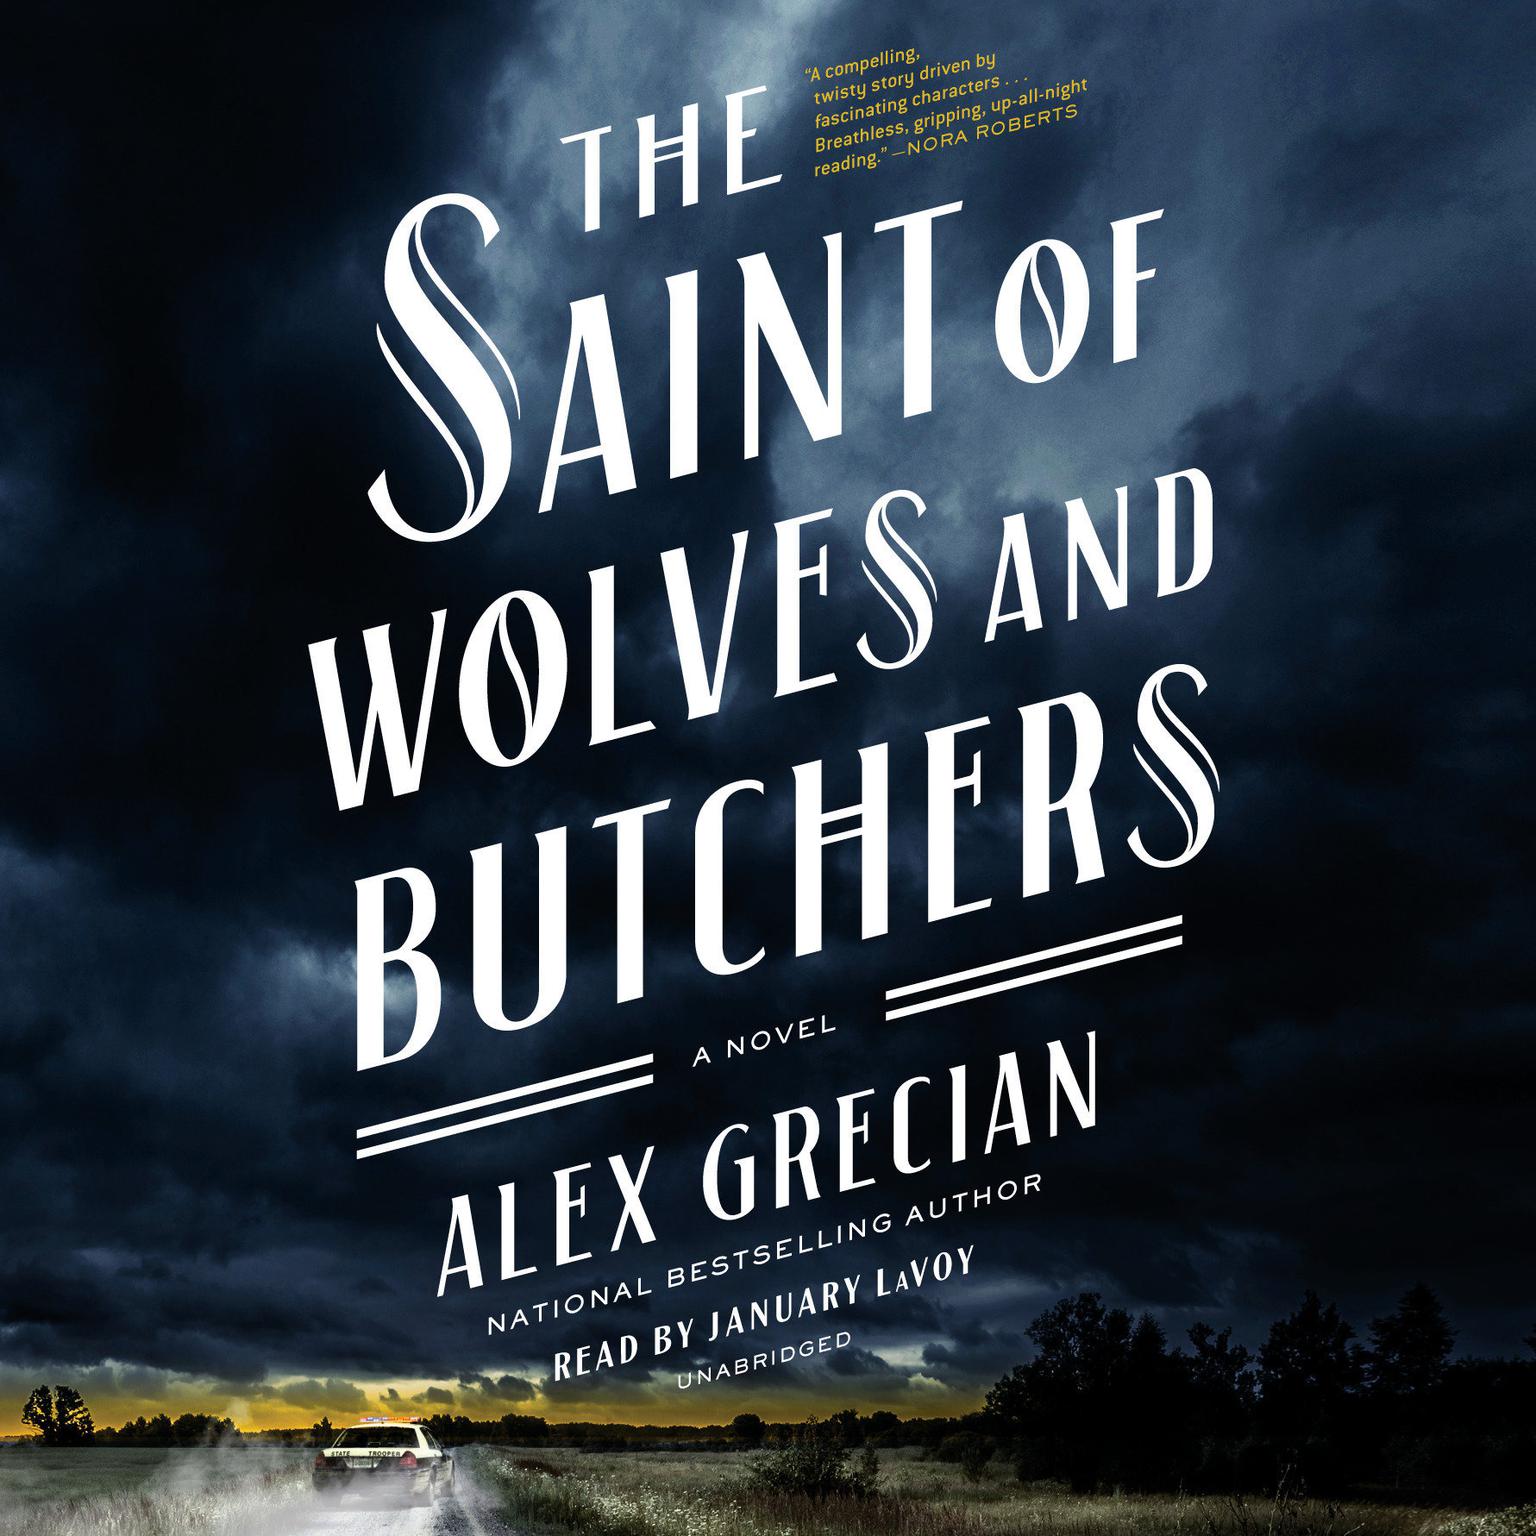 The Saint of Wolves and Butchers Audiobook, by Alex Grecian